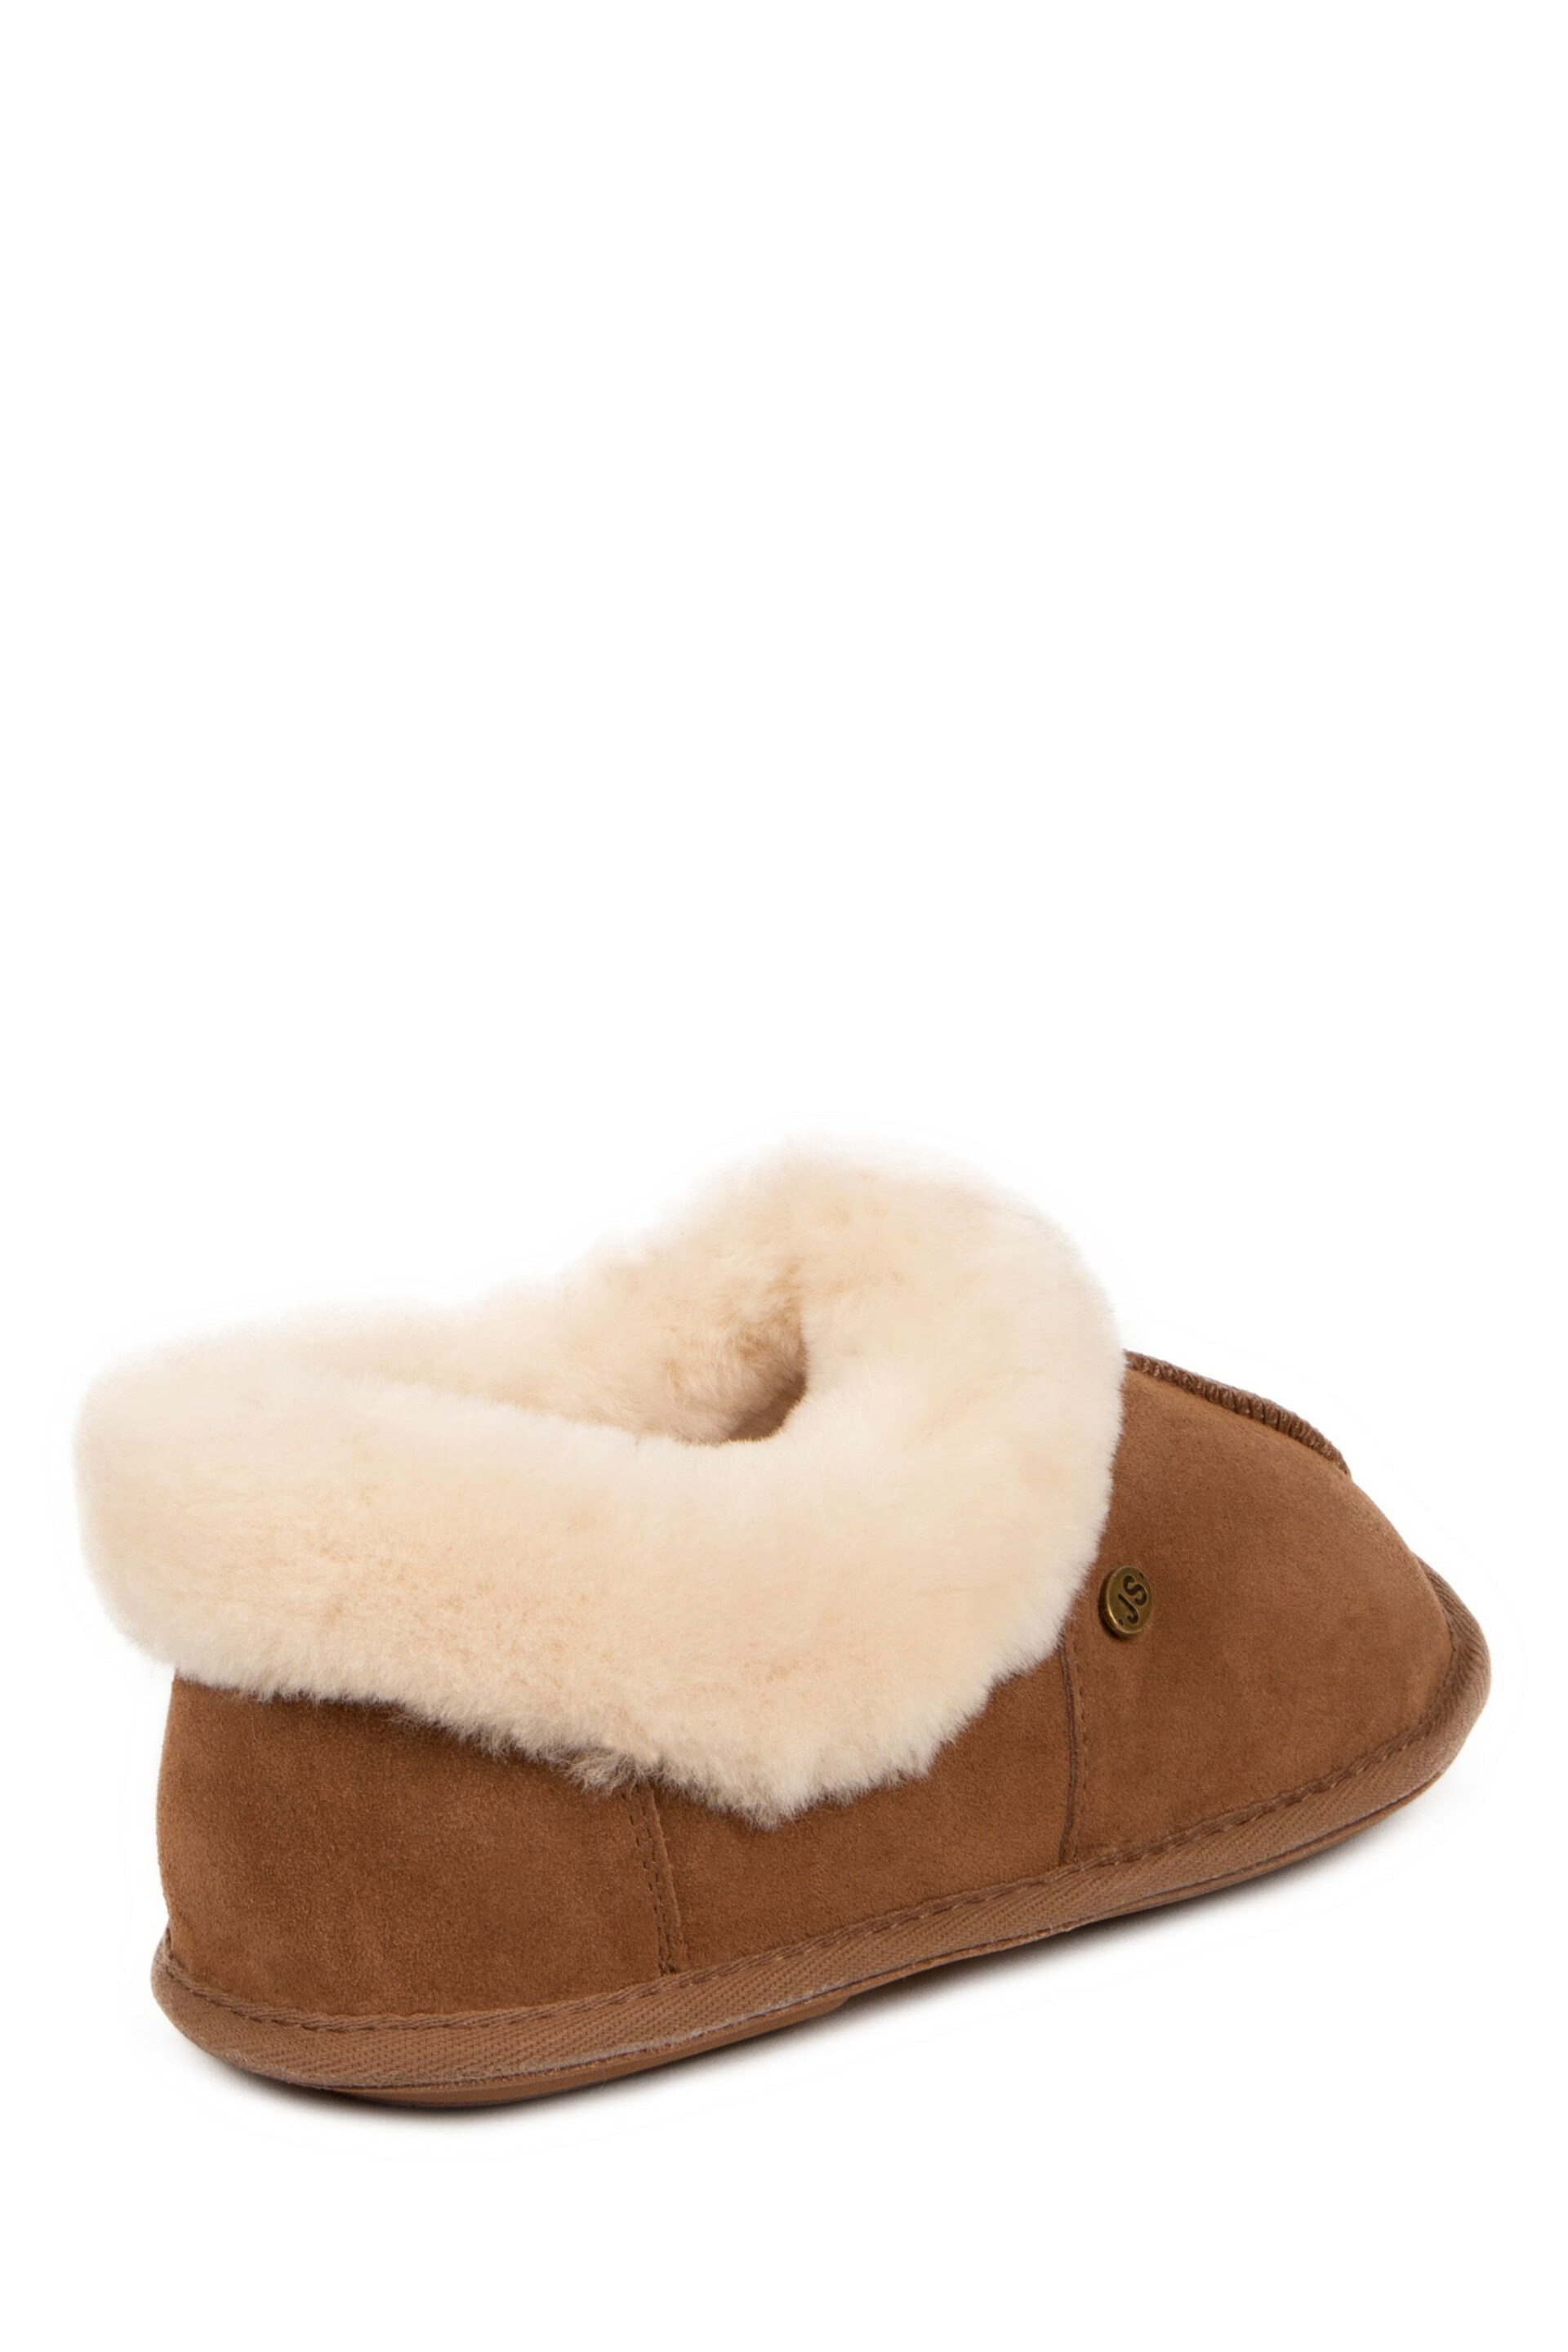 Just Sheepskin Brown Ladies Classic Slippers - Image 4 of 5